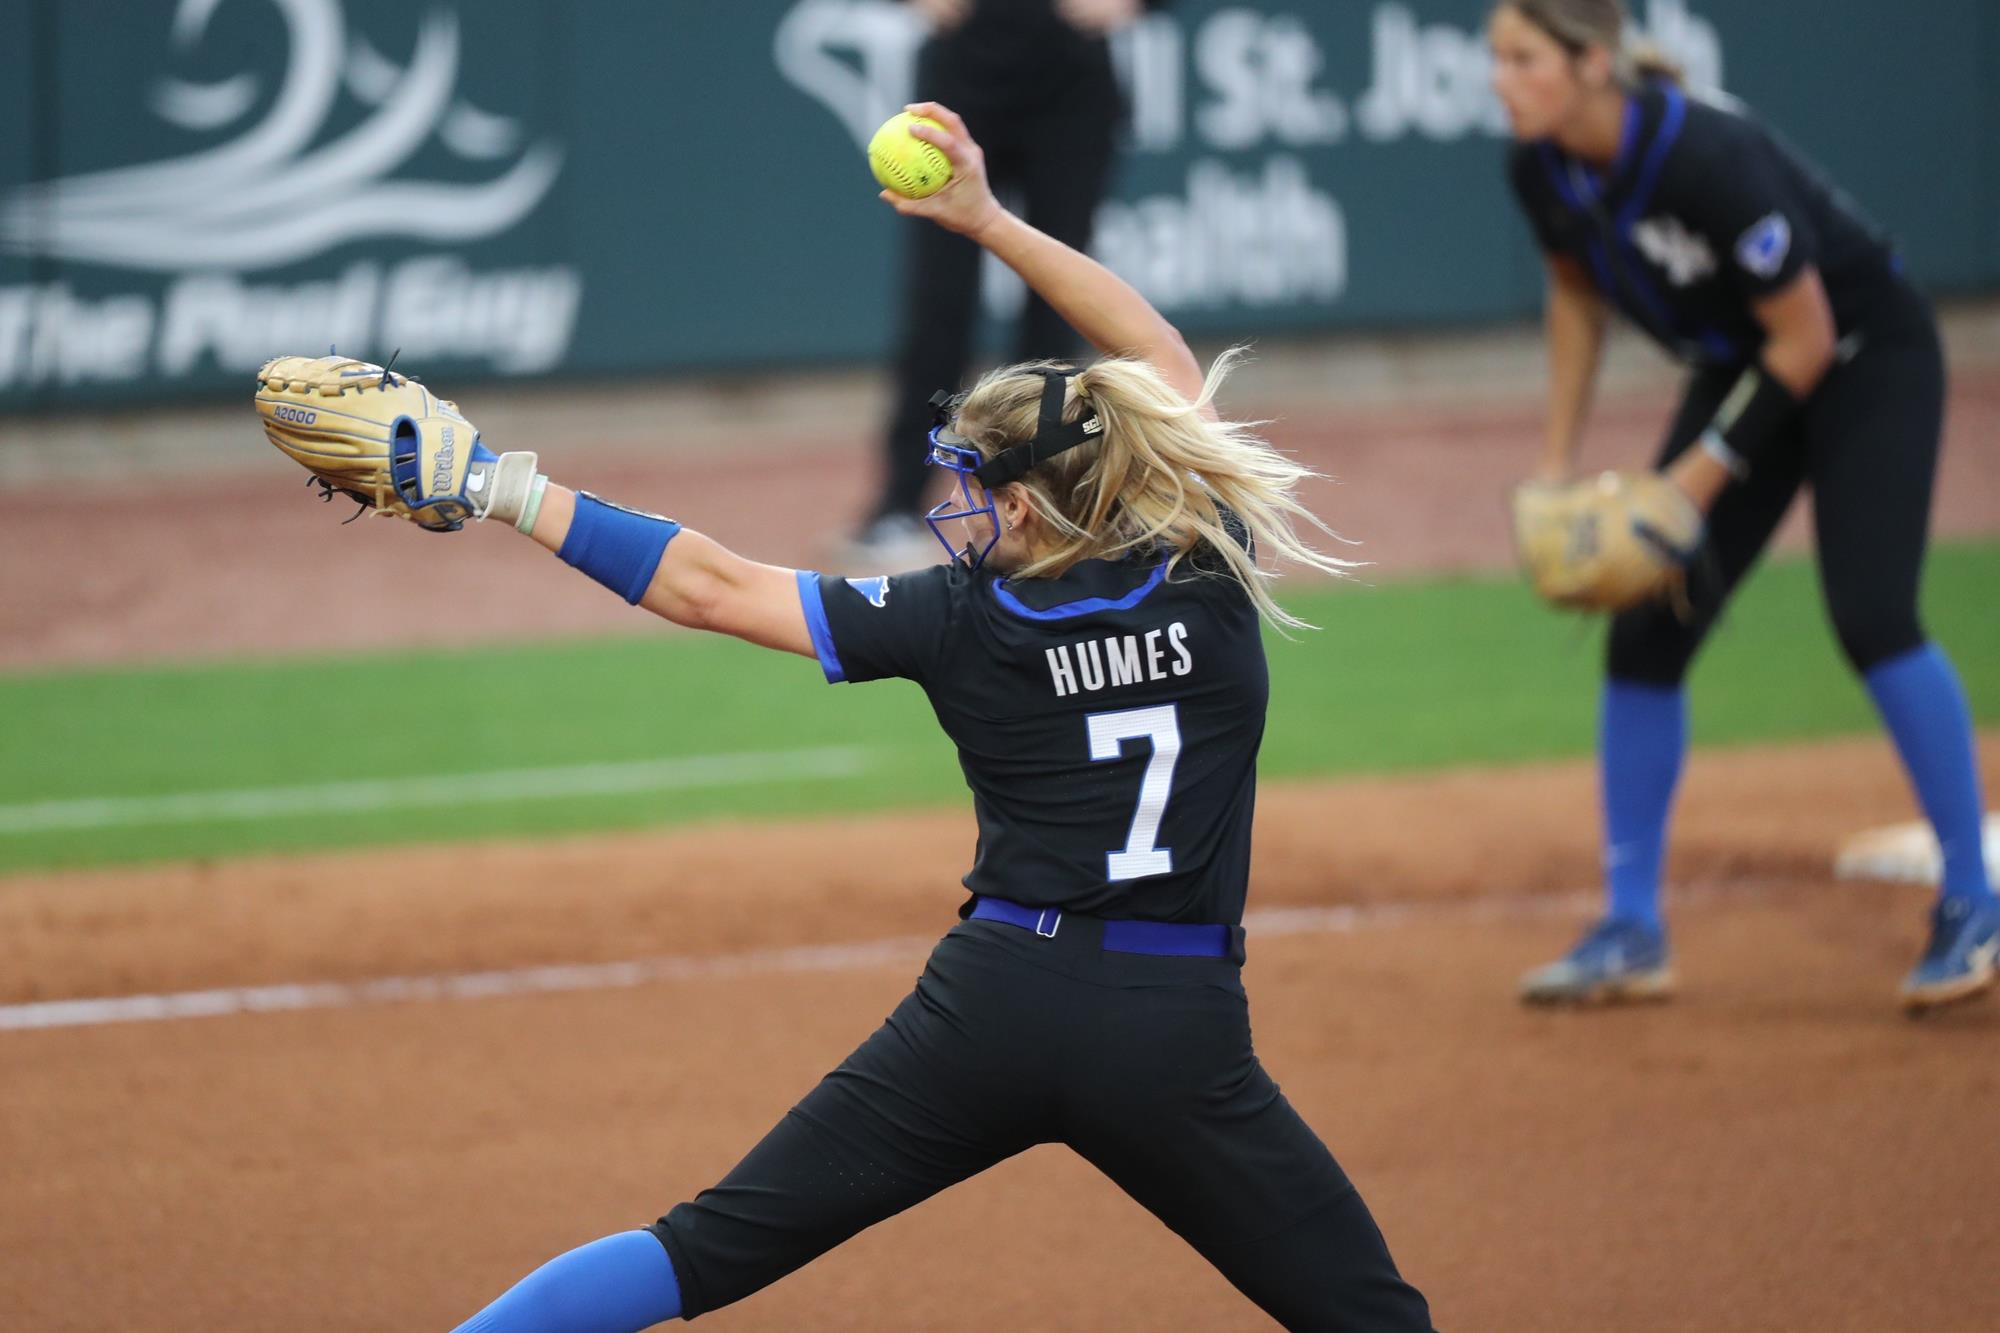 Humes’ Career-High 11 Strikeouts Sends No. 17 UK Past Texas A&M